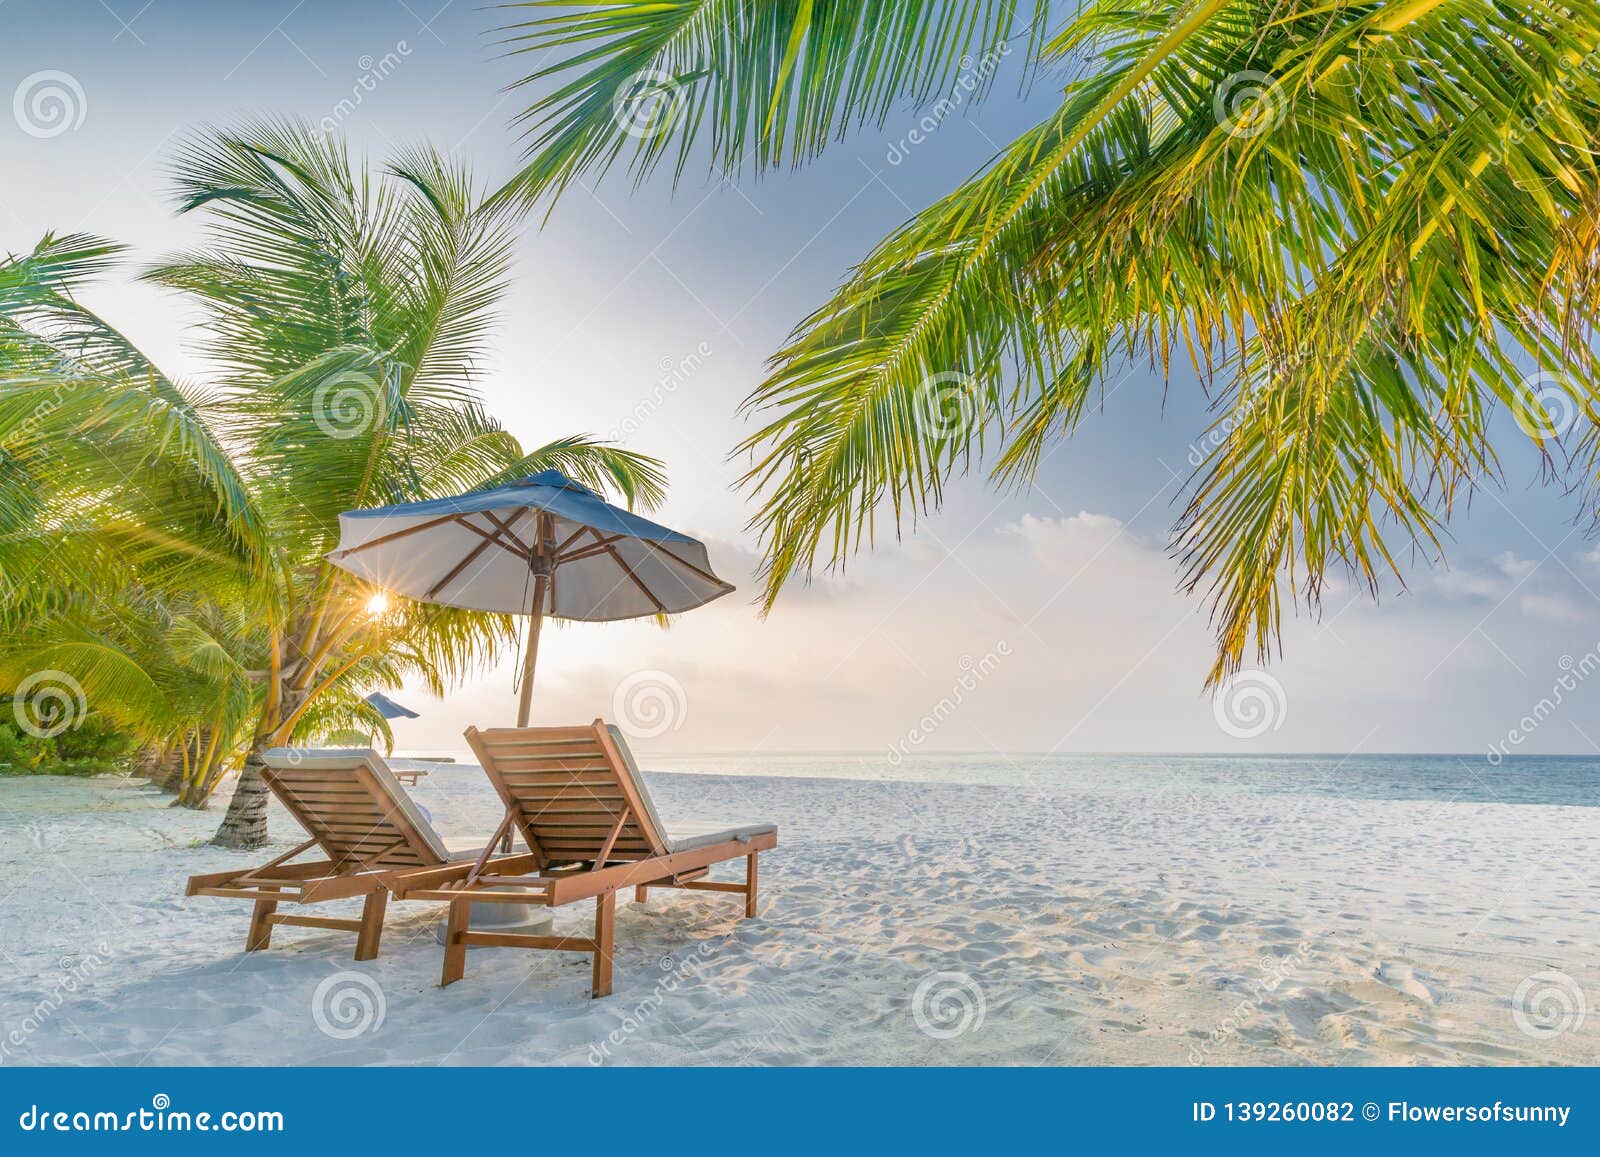 Beautiful Beach Landscape Summer Holiday And Vacation Concept Inspirational Tropical Beach Beach Background Banner Stock Photo Image Of Hotel Blue